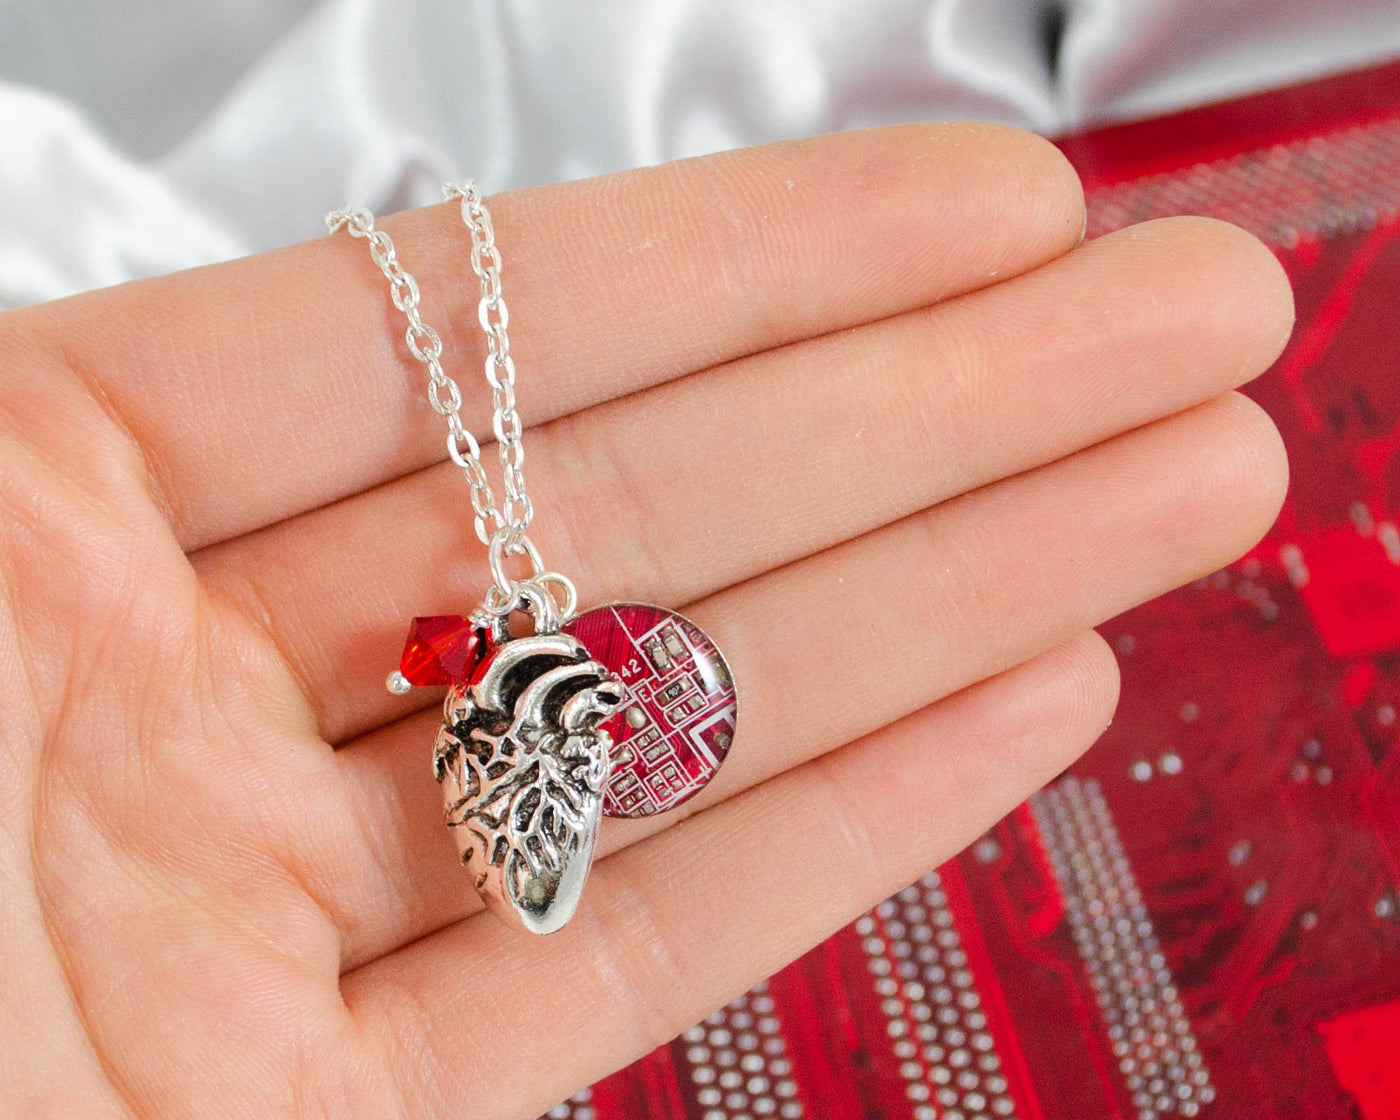 Anatomical Heart and Circuit Board Charm Necklace, Valentines Day Jewelry